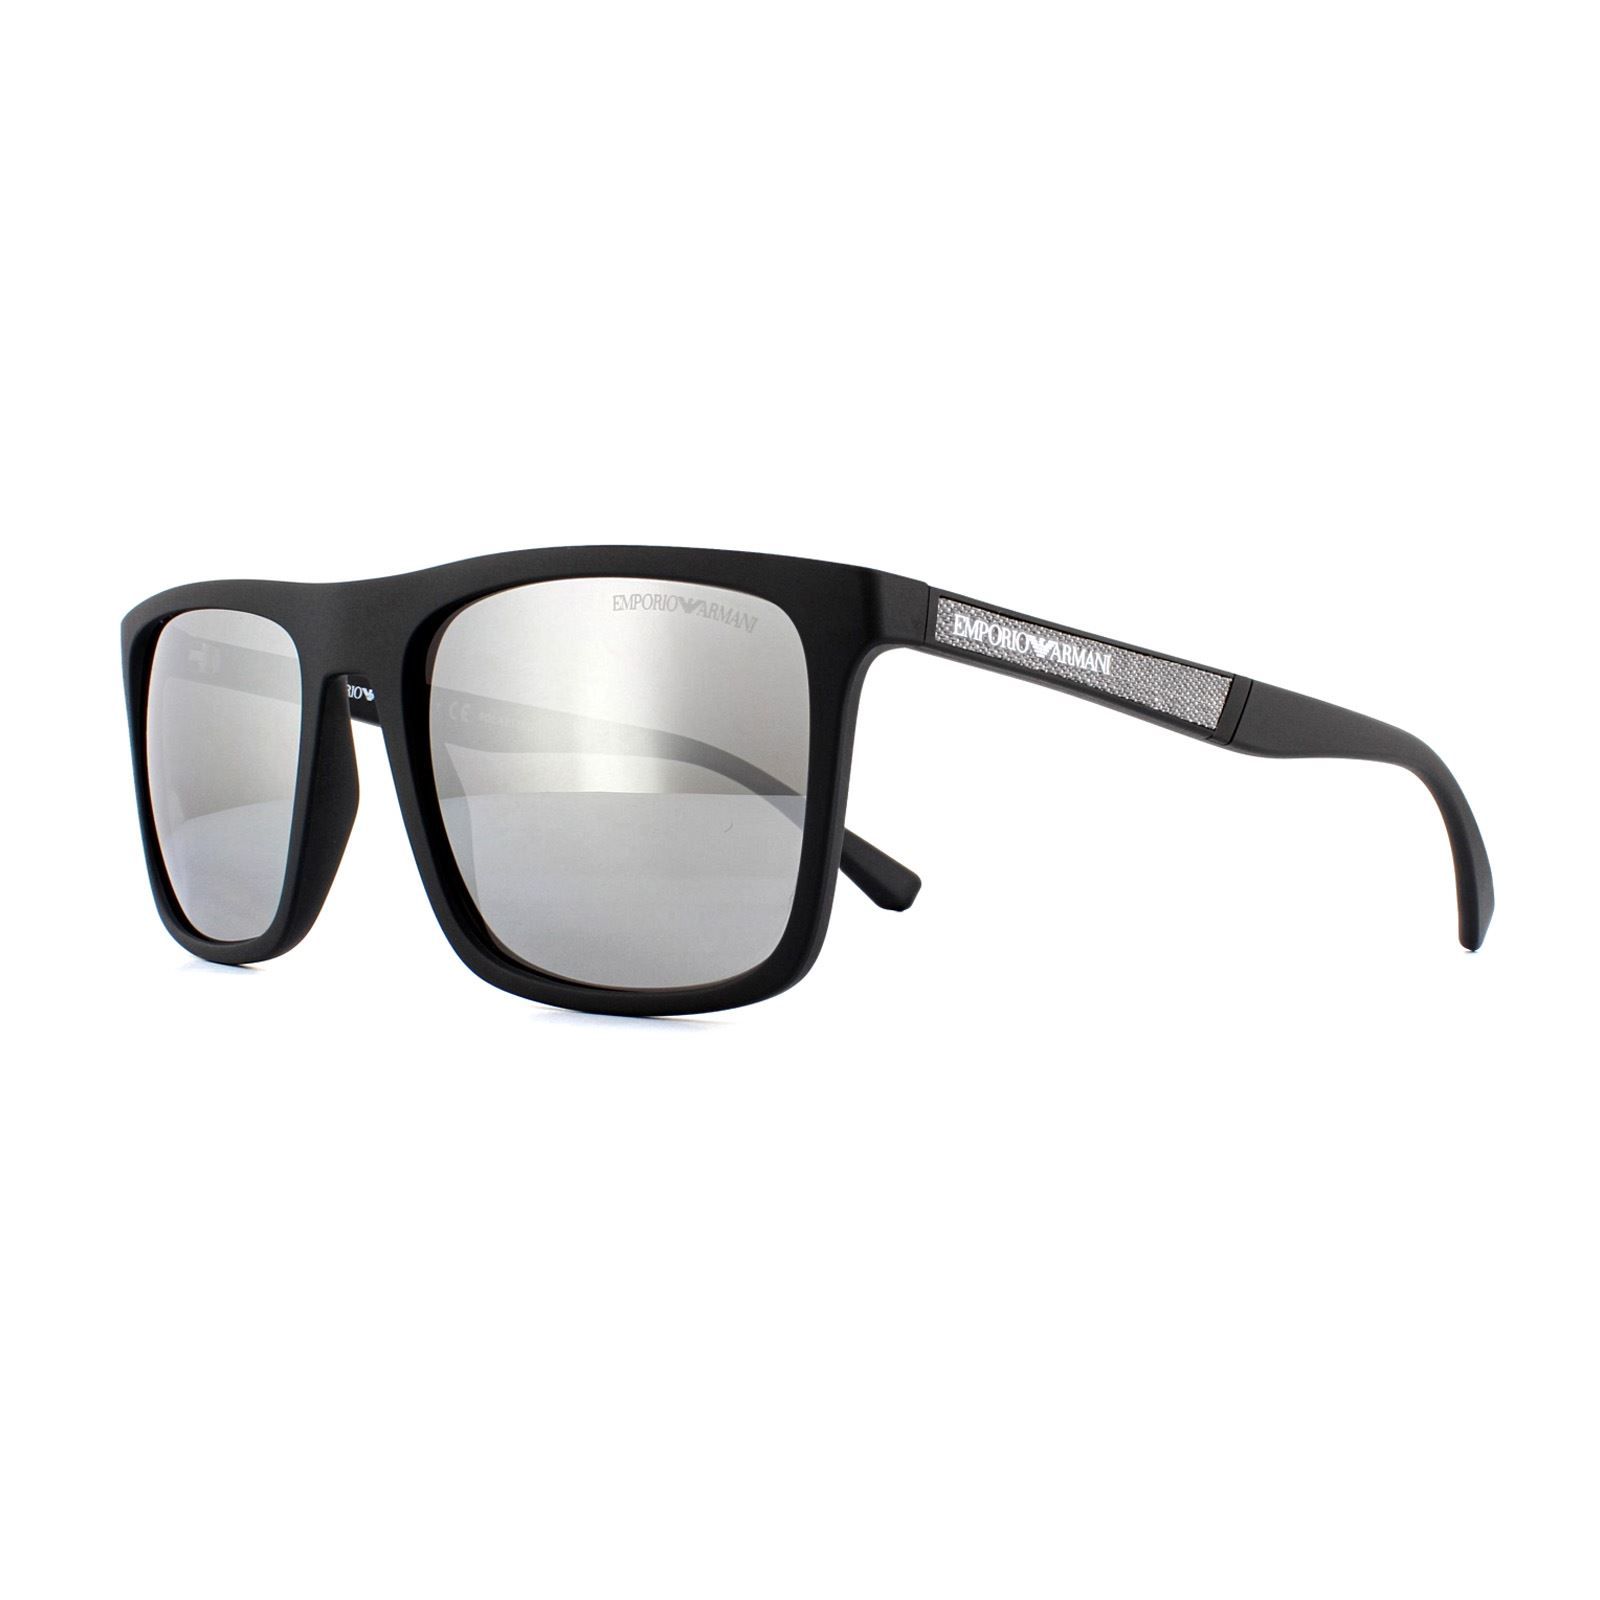 Emporio Armani Sunglasses EA4097 5042/Z3 Matt Black Silver Mirror Polarized have a classic rectangular shape with wayfarer like features with the slightly winged temples that feature a metal stripe and the Emporio Armani lettered logo with the Armani eagle inset.